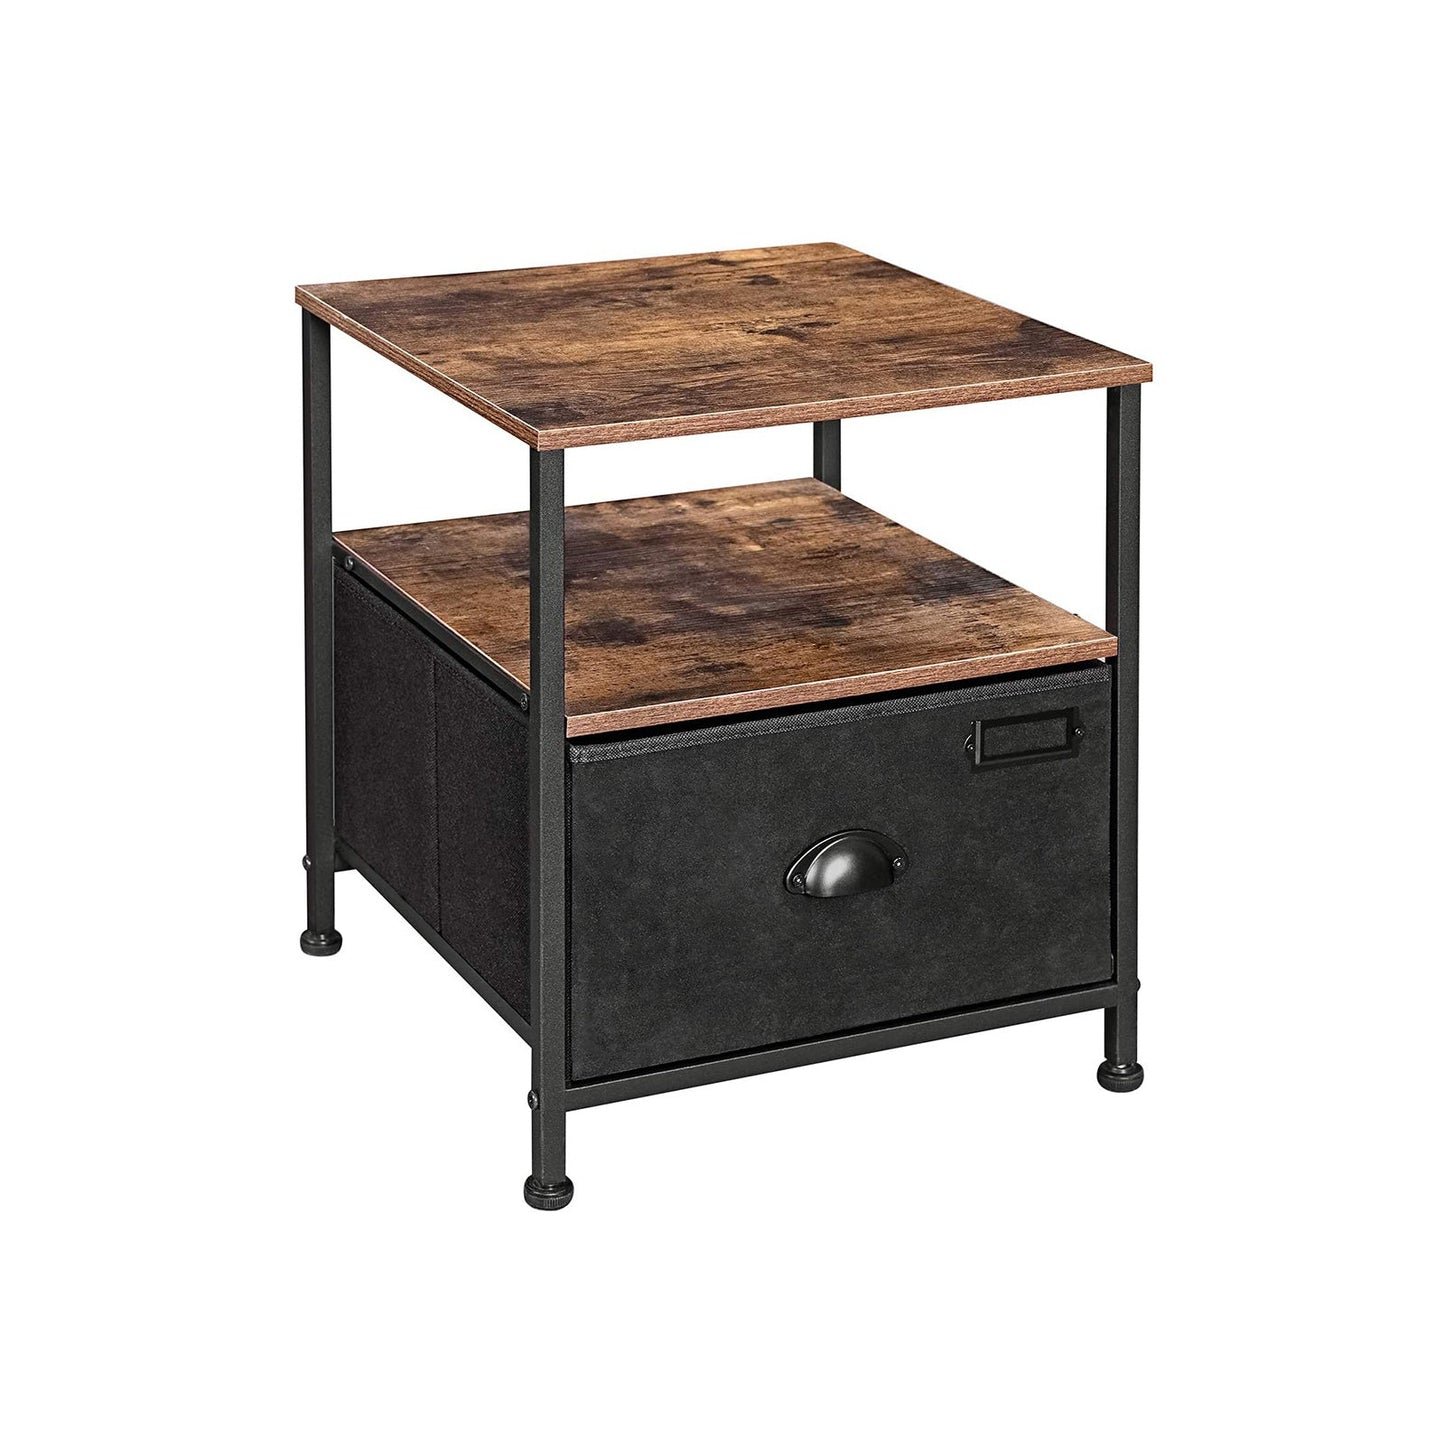 Side table/bedside table with drawer